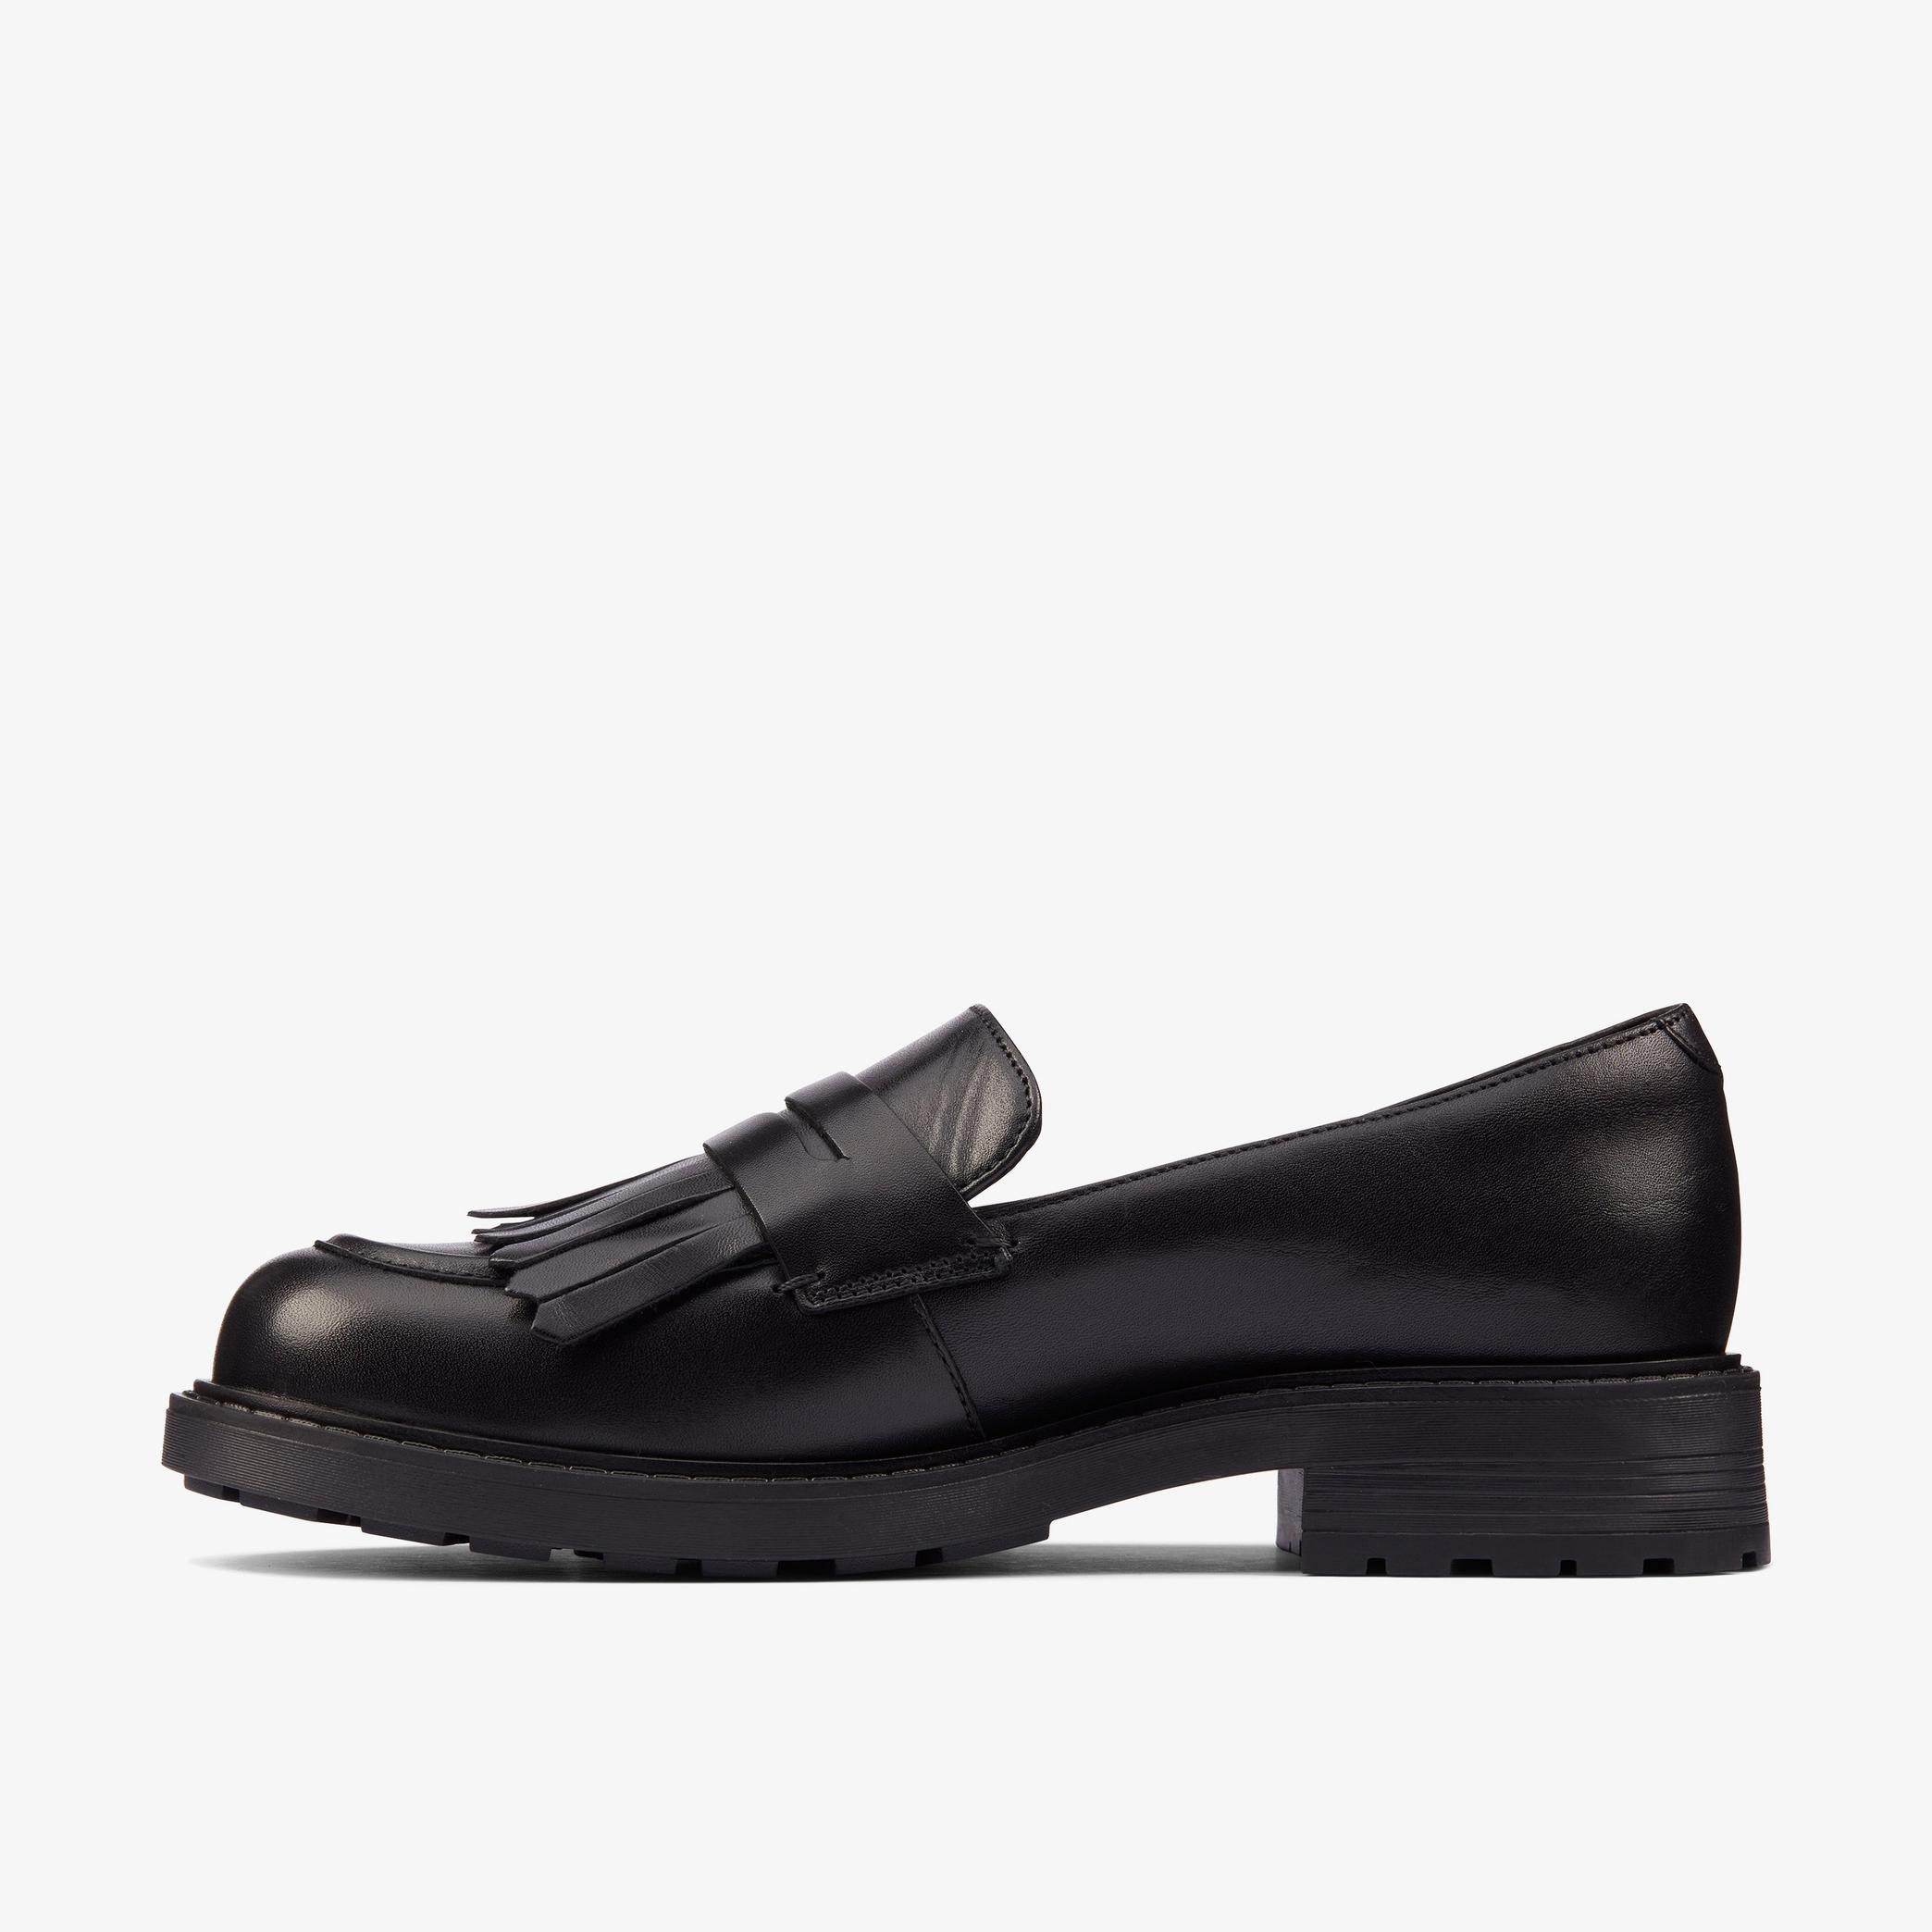 Orinoco 2 Loafer Black Hi Shine Leather Loafers, view 2 of 6